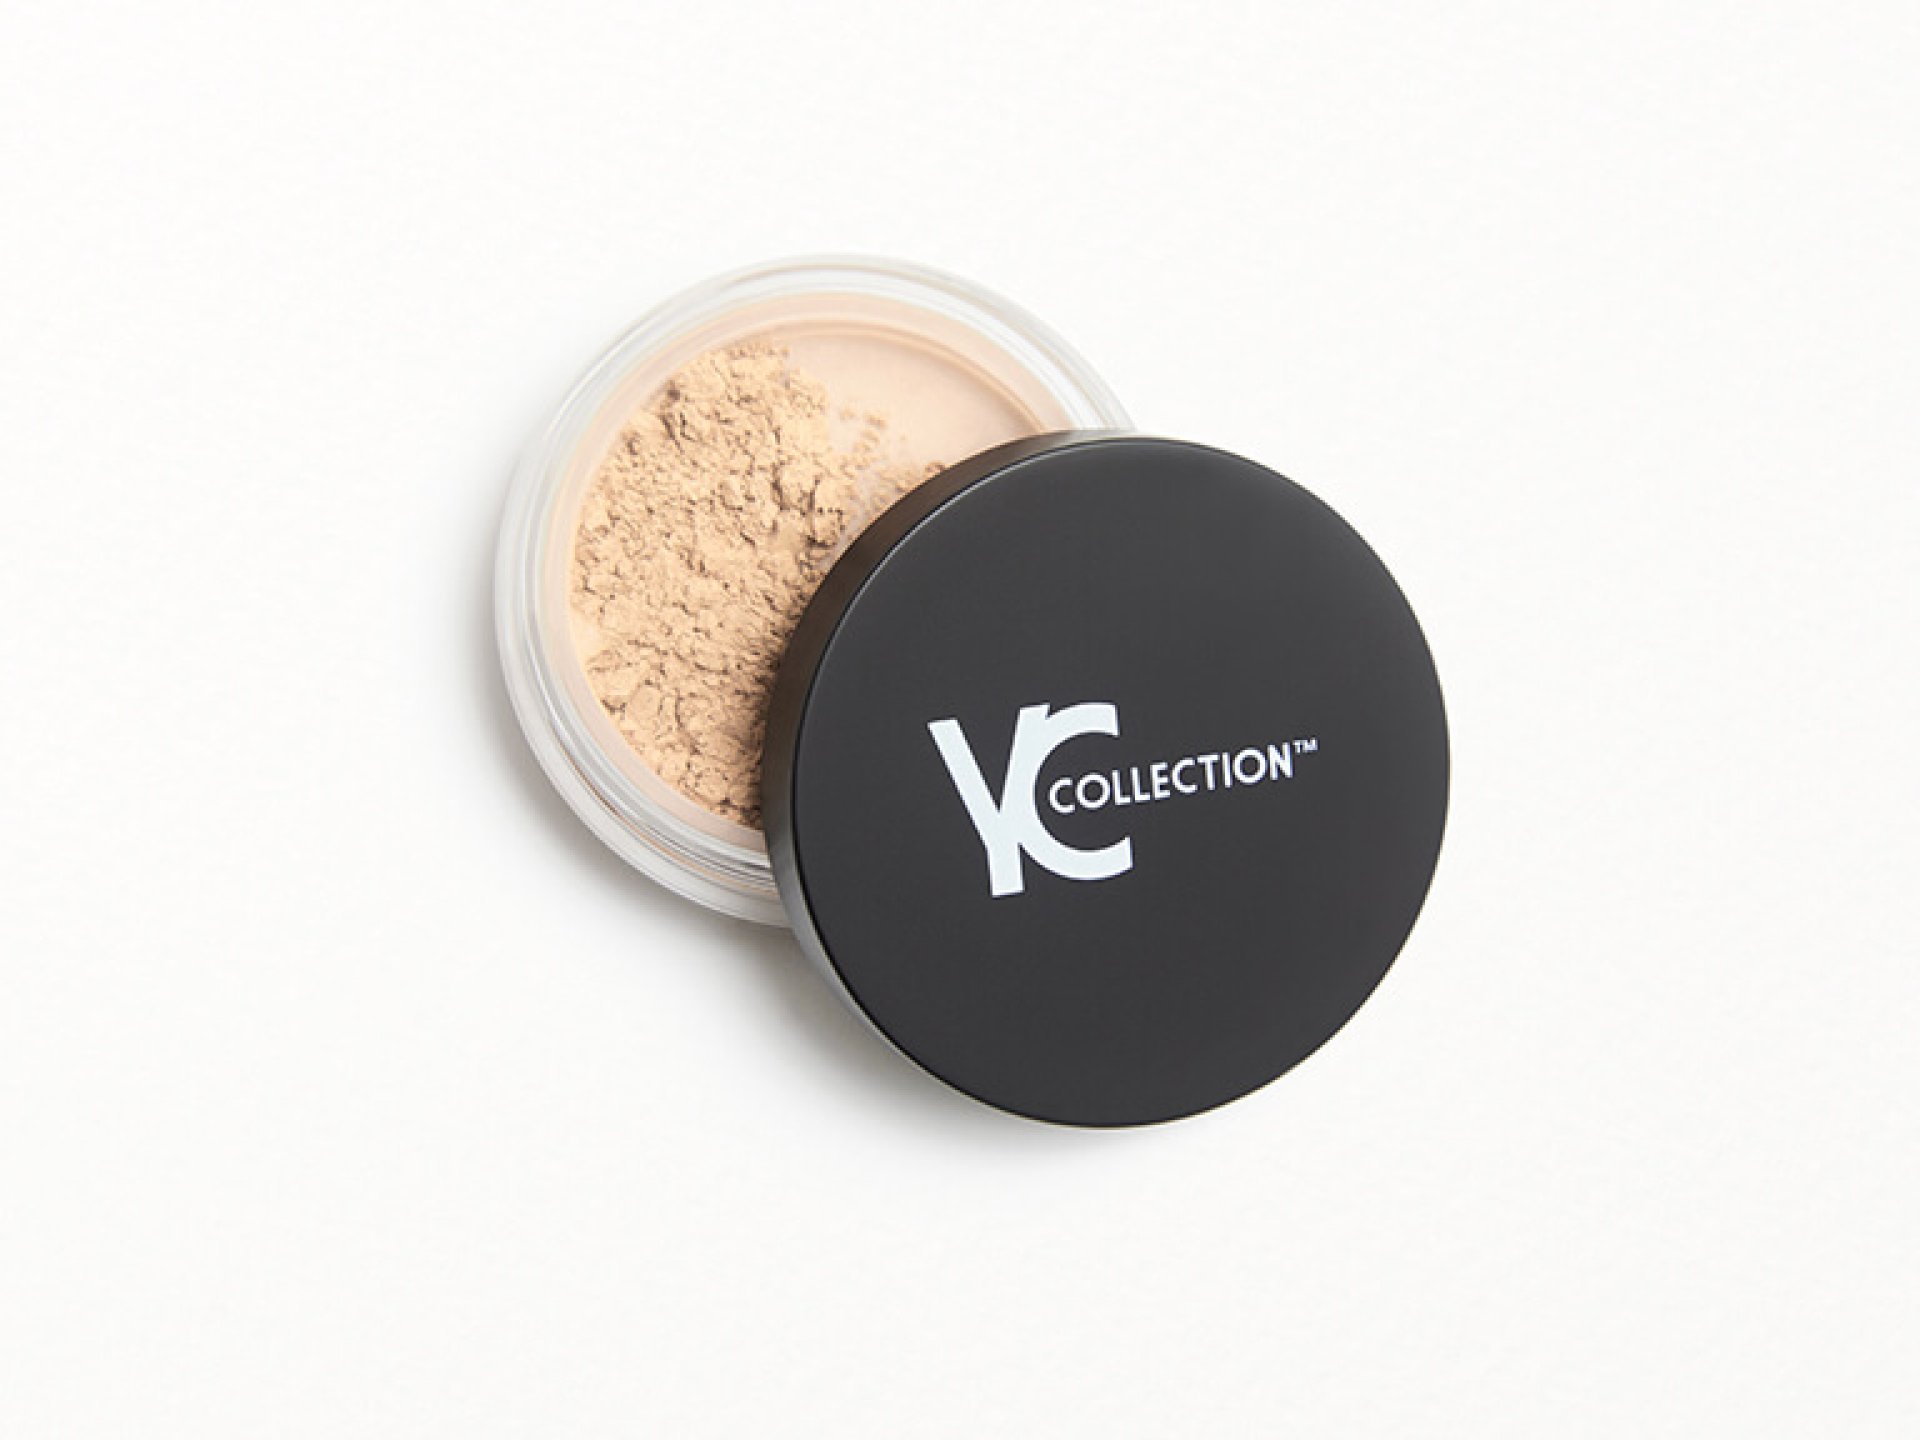 YC COLLECTION Loose Setting Powder in #117